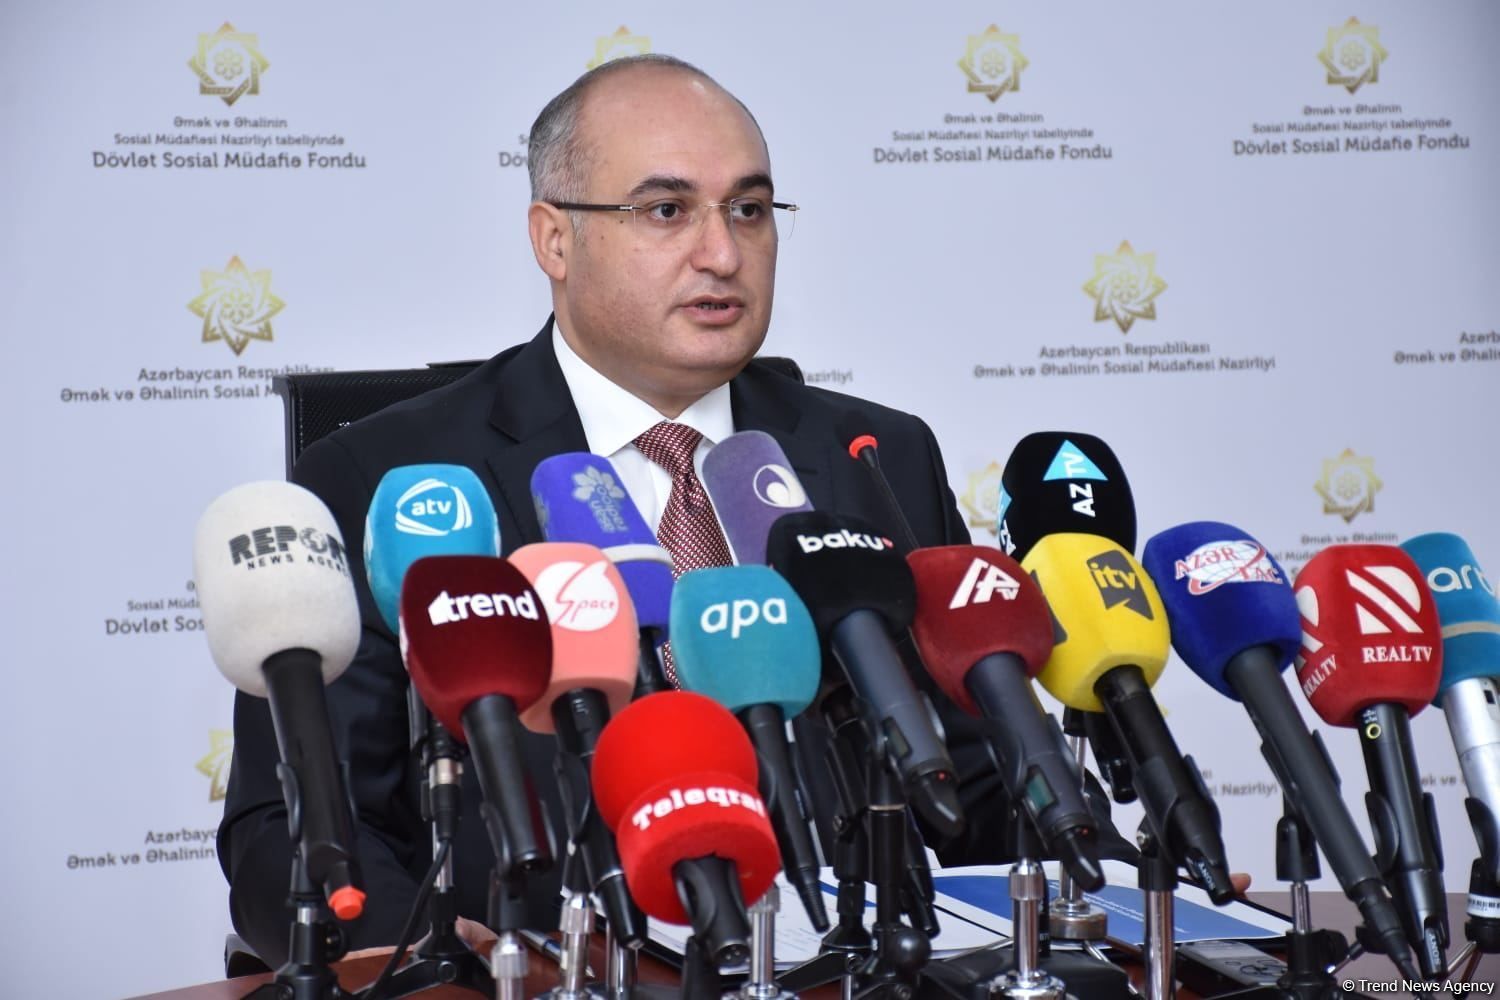 Official: Implementation of third package of social reforms continues in Azerbaijan